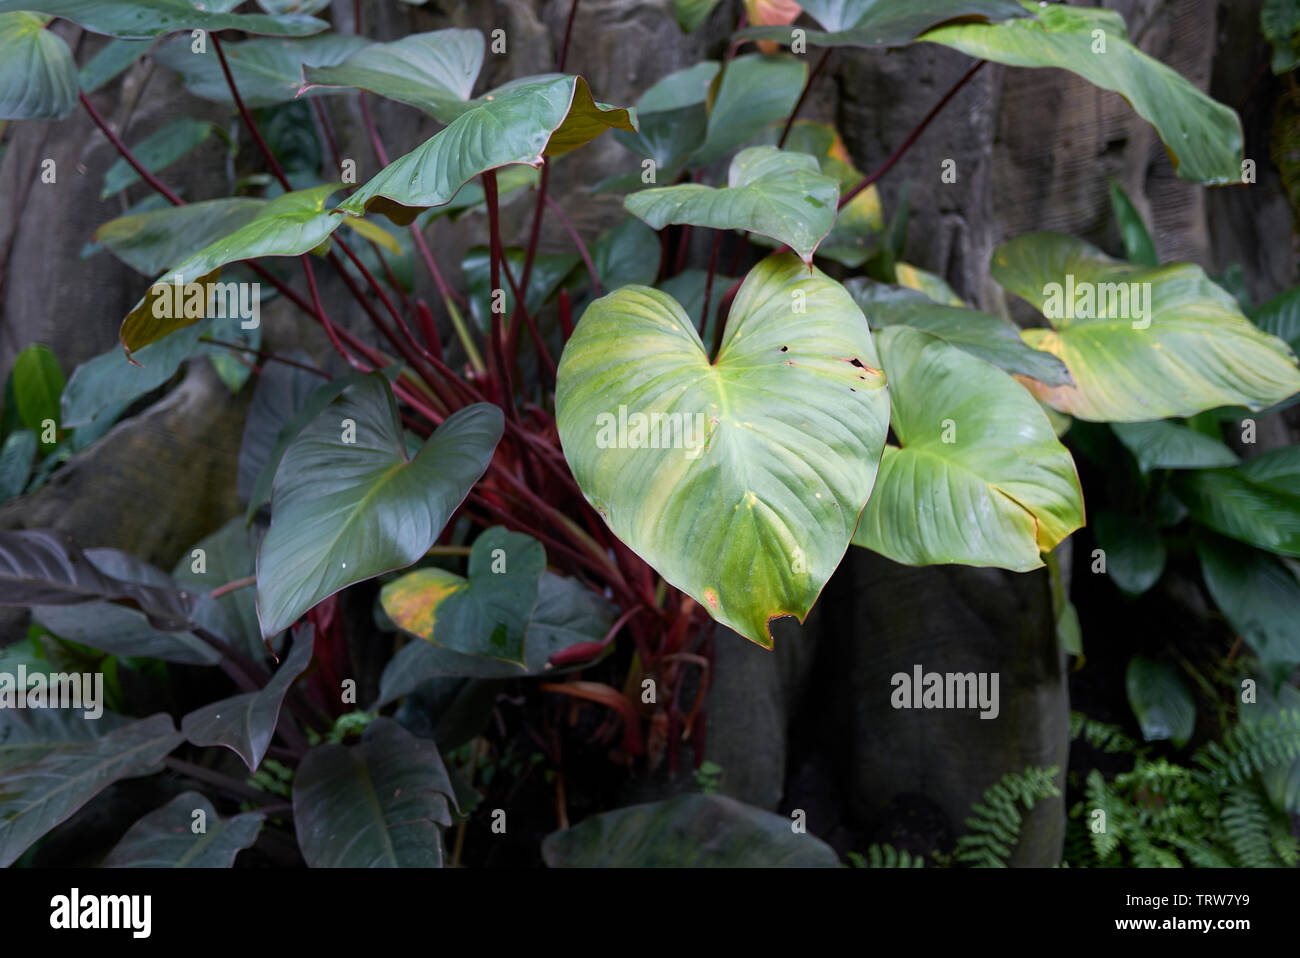 Philodendron erubescens close up Stock Photo